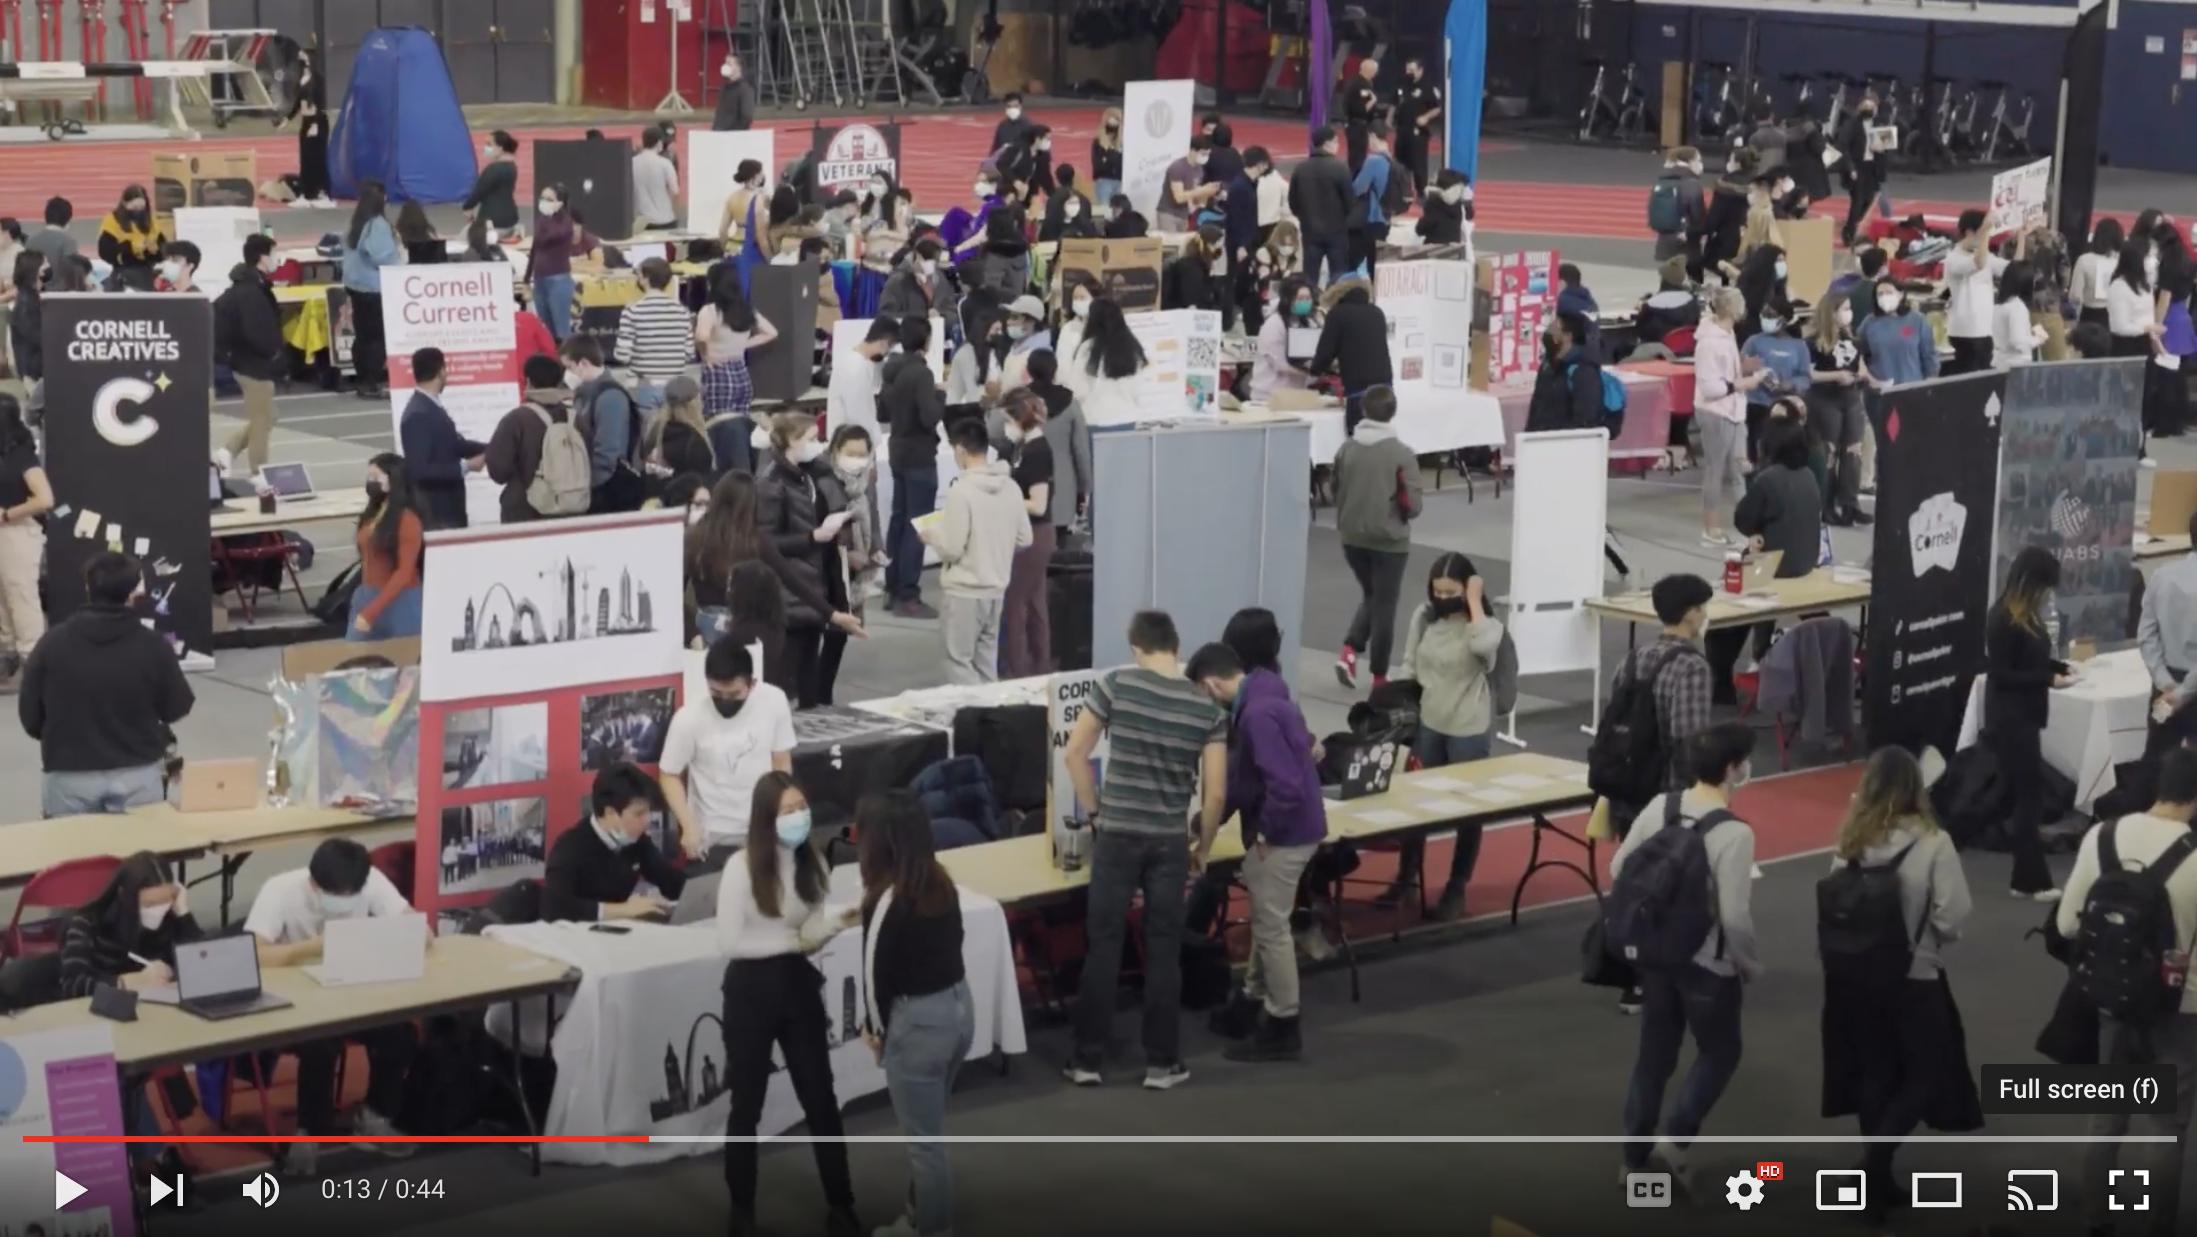 Students, tables, and booths in a large hall advertising clubs that exist at Cornell.